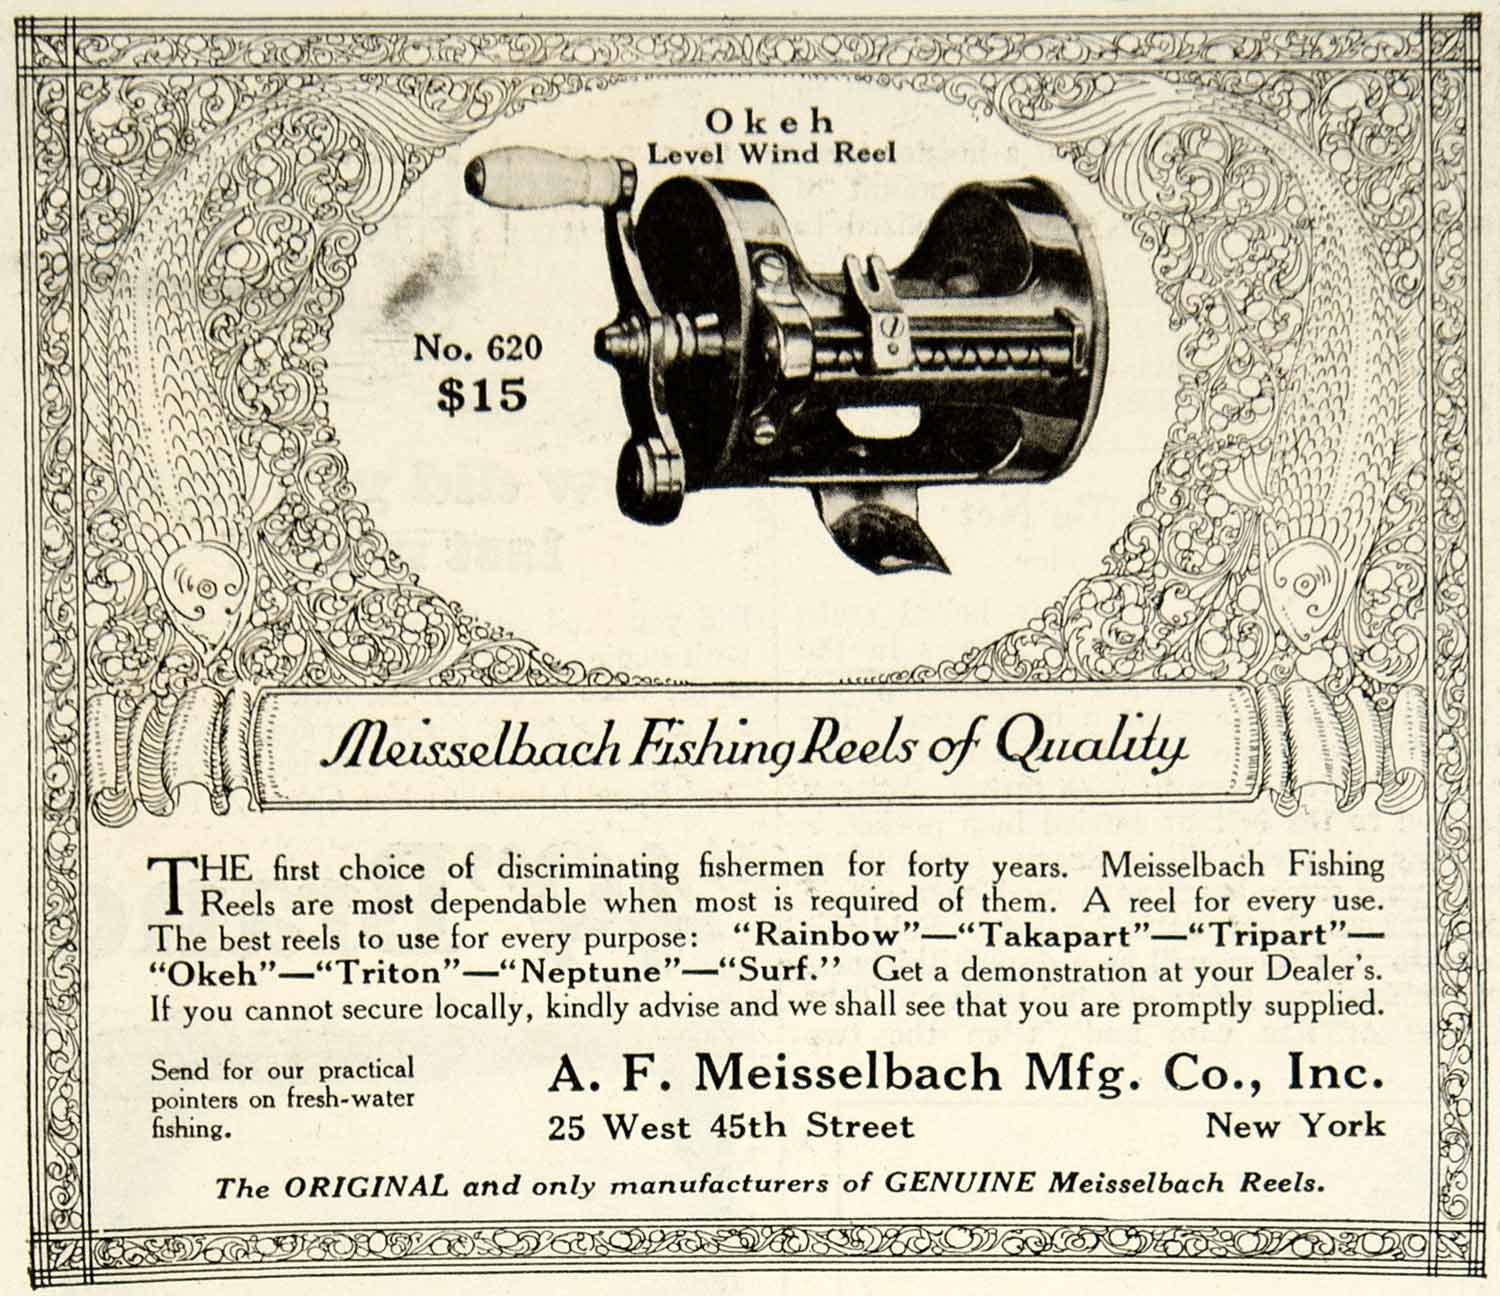 1925 Ad AF Meisselbach Fishing Reel 25 W 45th St NYC Bait Tackle Sporting YOR1